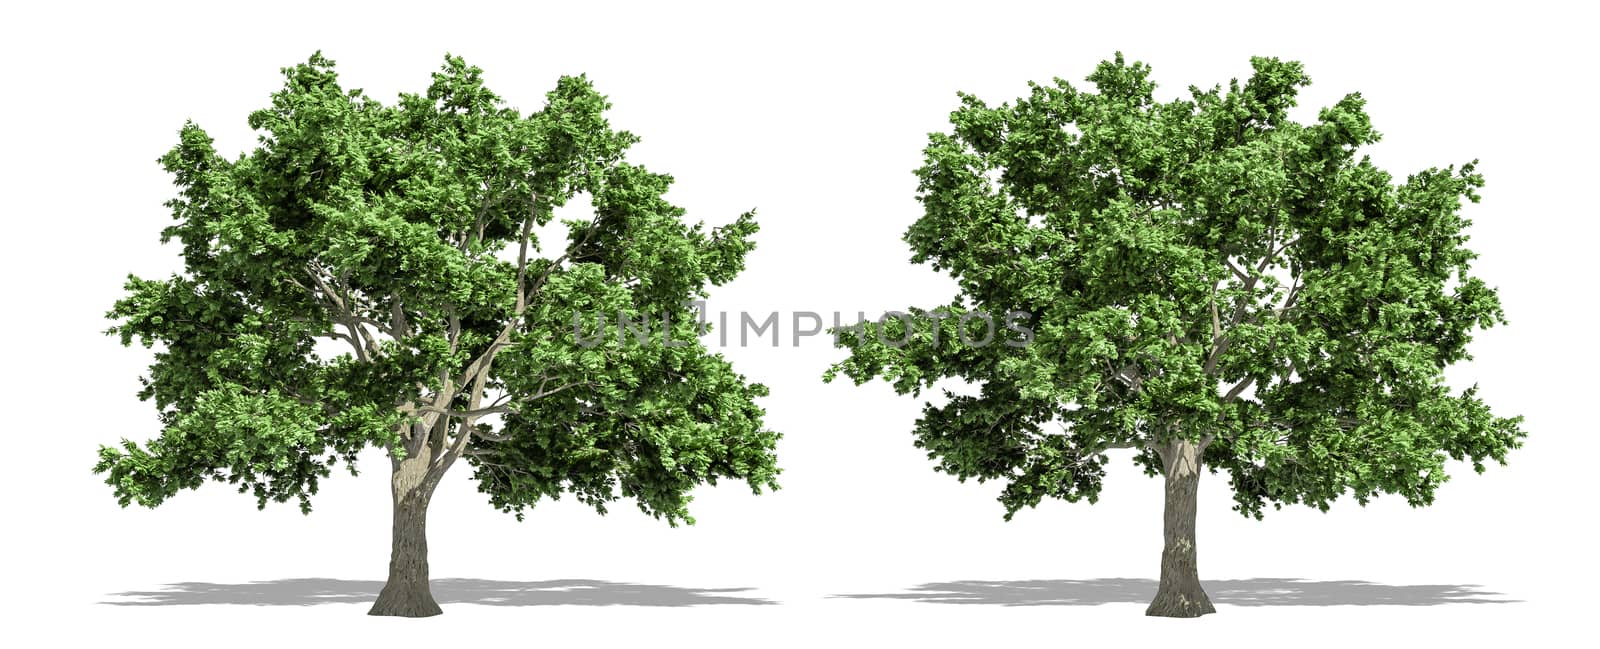 Beautiful Acer saccharum tree isolated and cutting on a white background with clipping path.